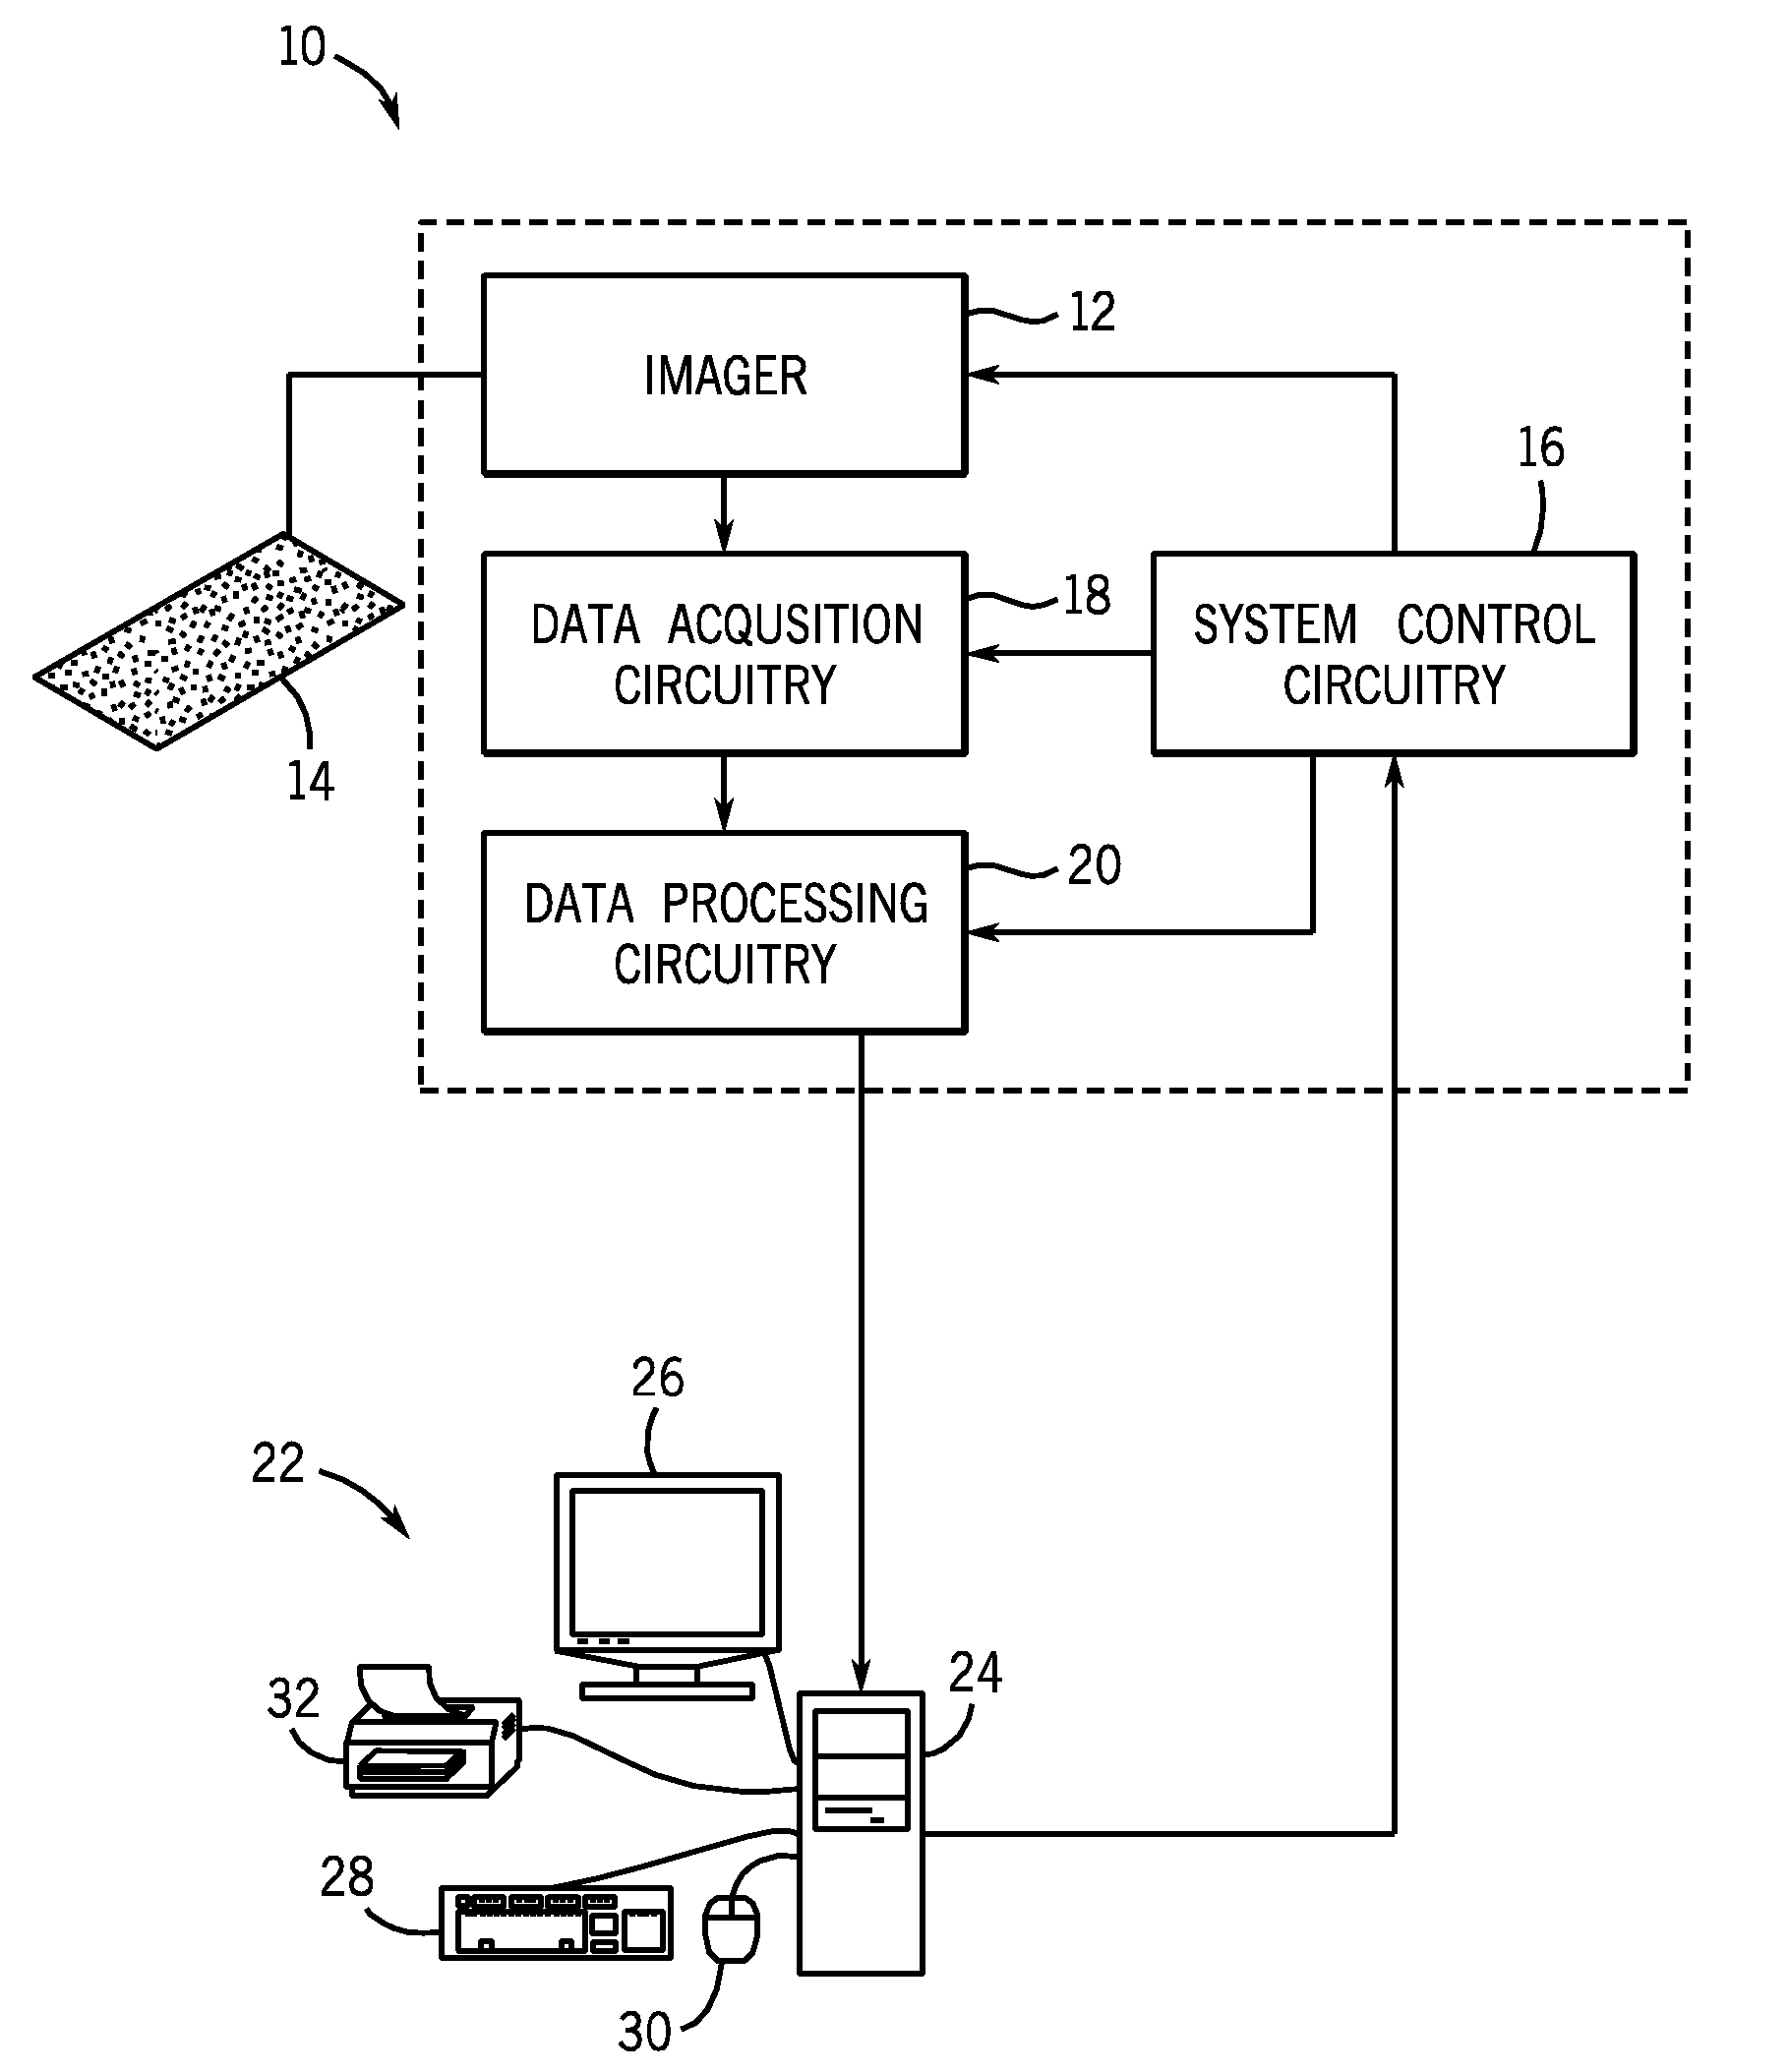 Method and Apparatus for Detecting Irregularities in Tissue Microarrays